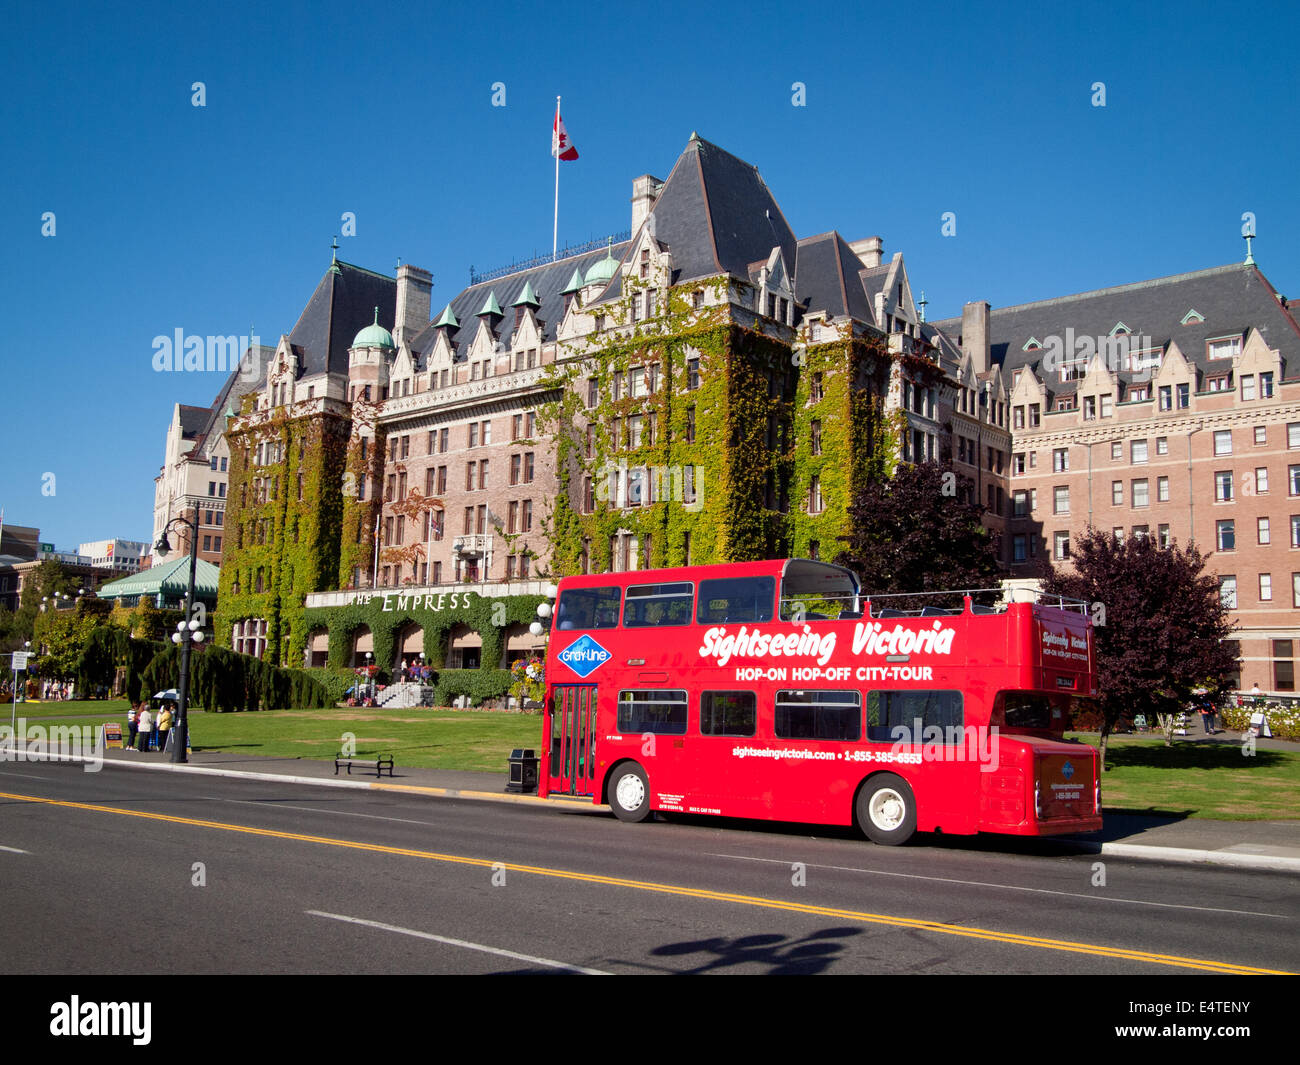 A view of the Fairmont Empress Hotel and a Gray Line double-decker sightseeing bus in Victoria, British Columbia, Canada. Stock Photo